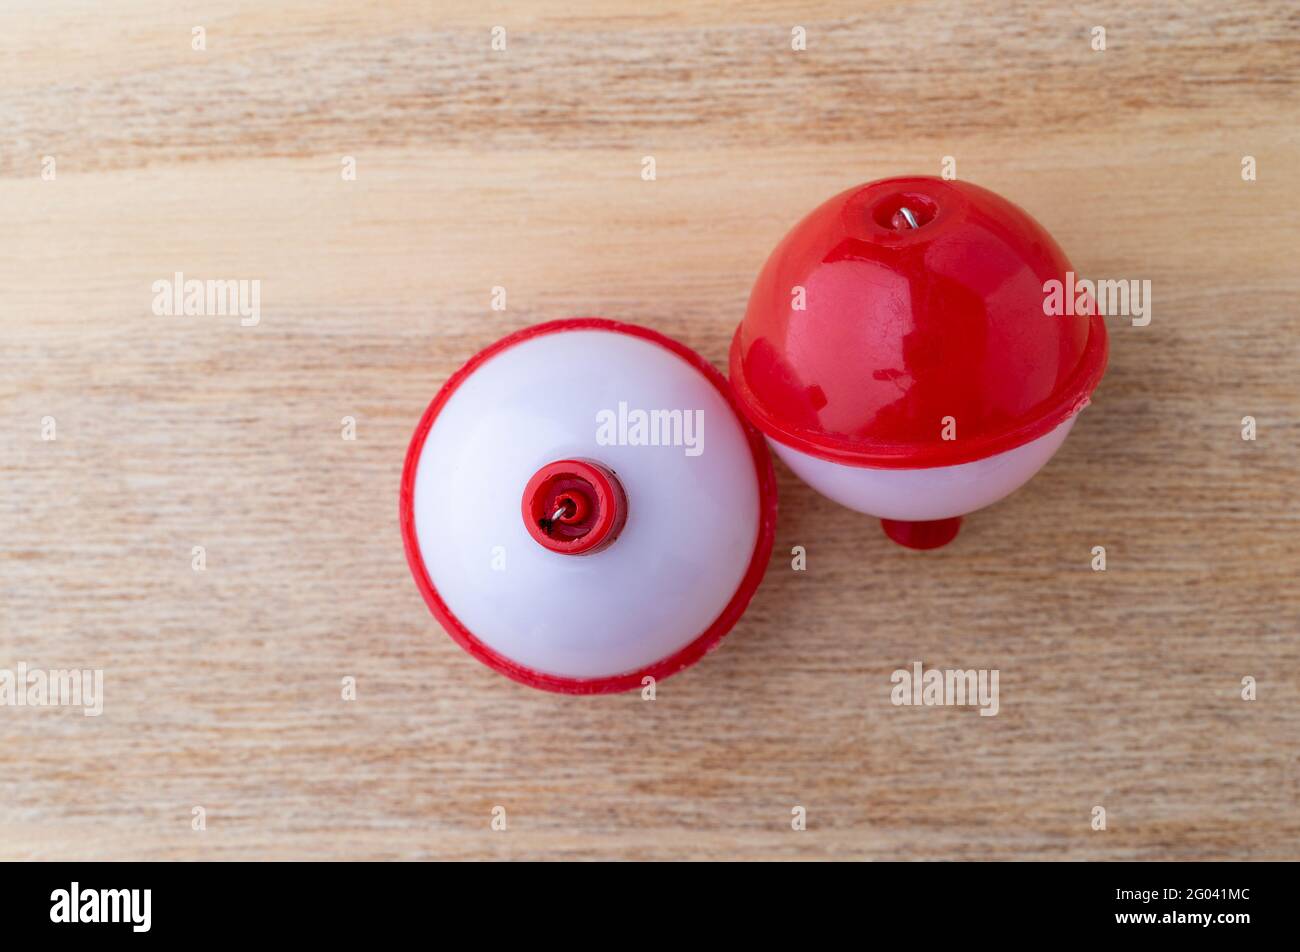 Top view of two red and white plastic fishing bobbers on a wood